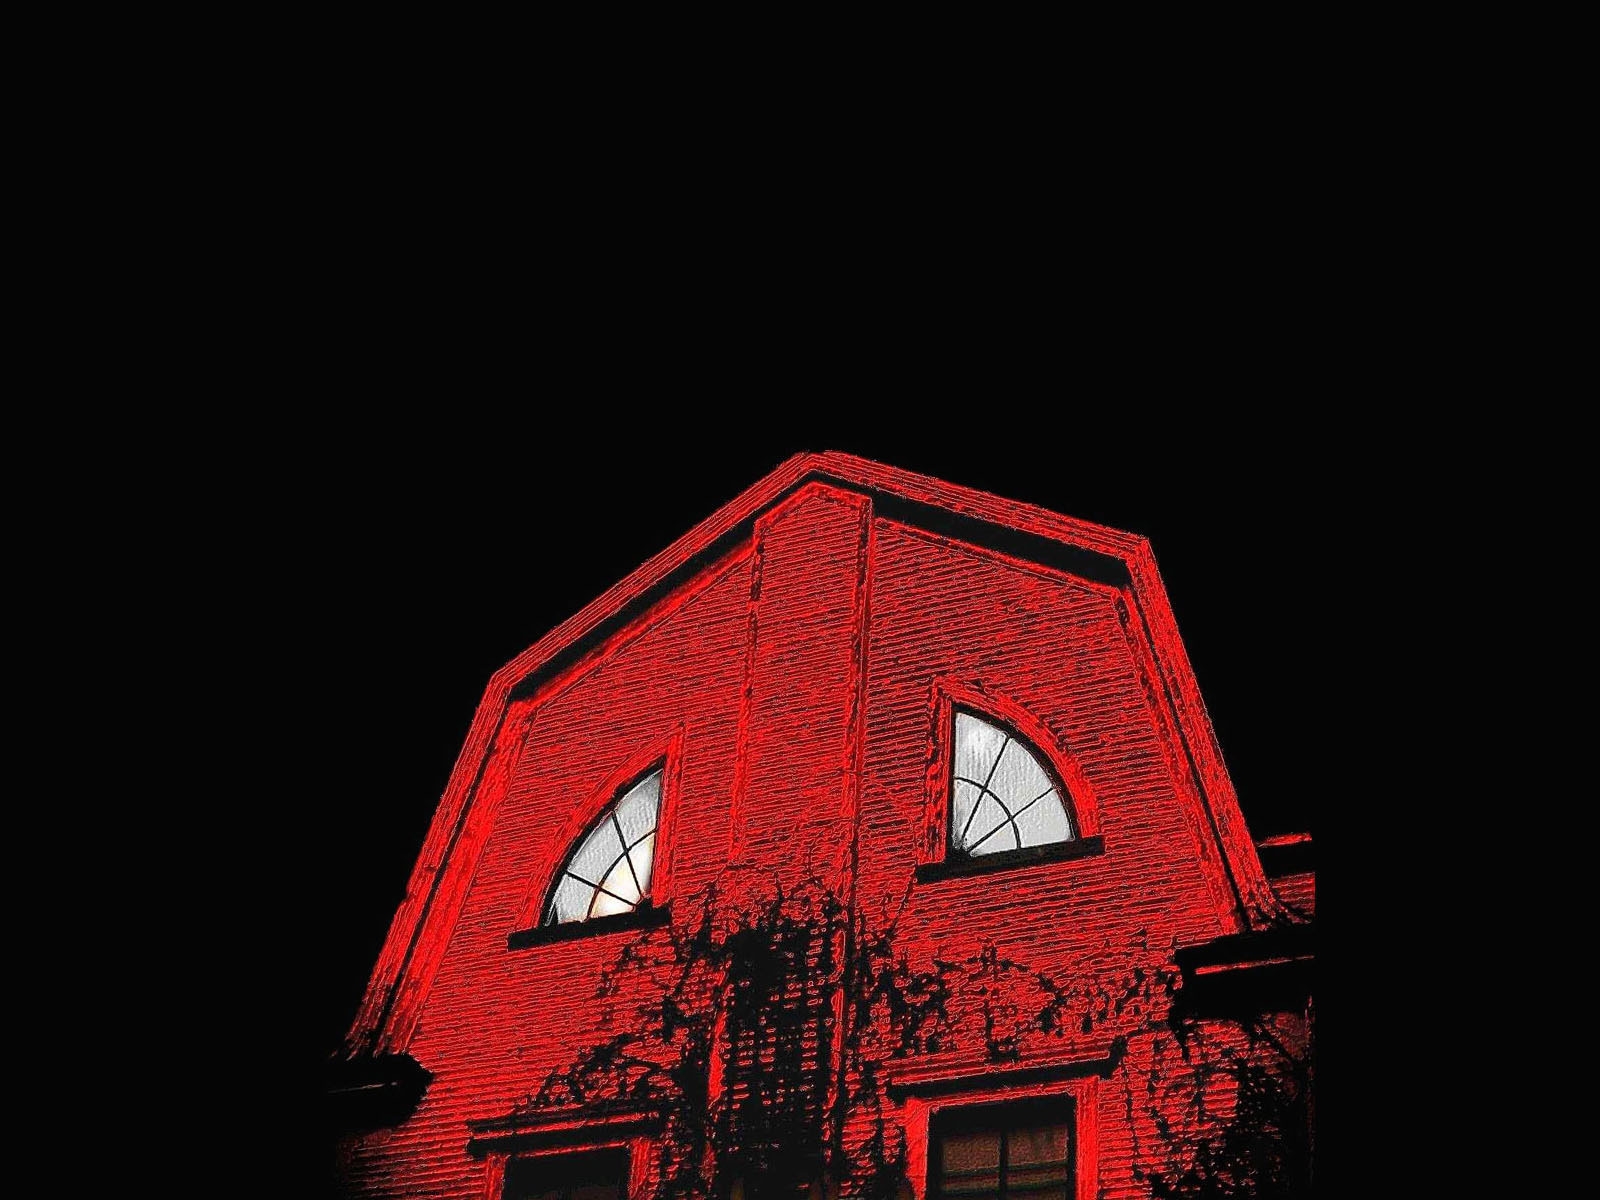 The Amityville Horror Lost Tapes for 1600 x 1200 resolution